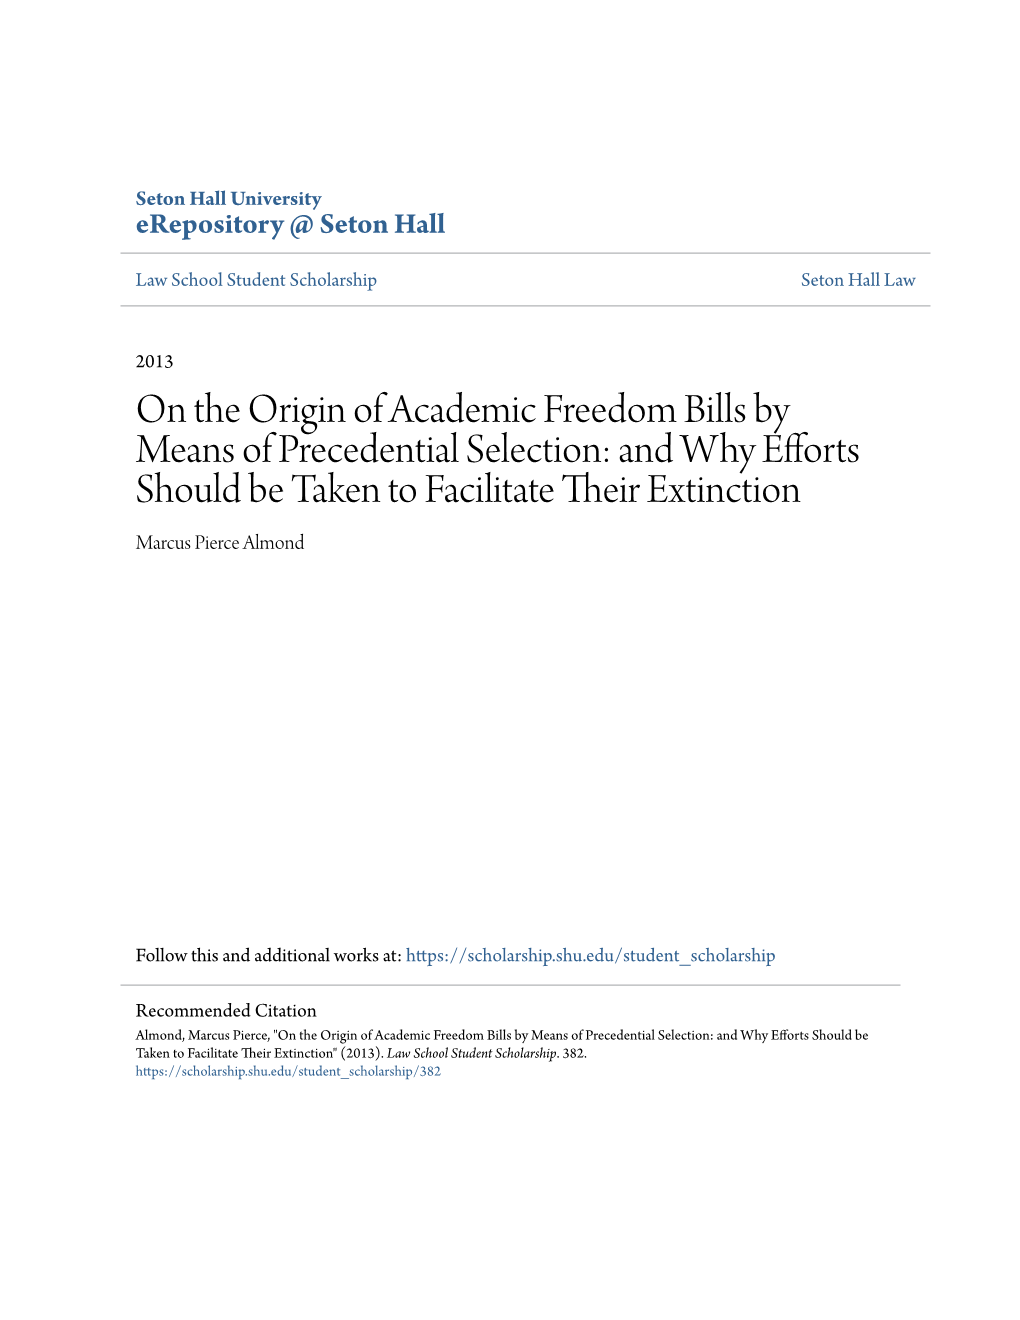 On the Origin of Academic Freedom Bills by Means of Precedential Selection: and Why Efforts Should Be Taken to Facilitate Their Extinction Marcus Pierce Almond